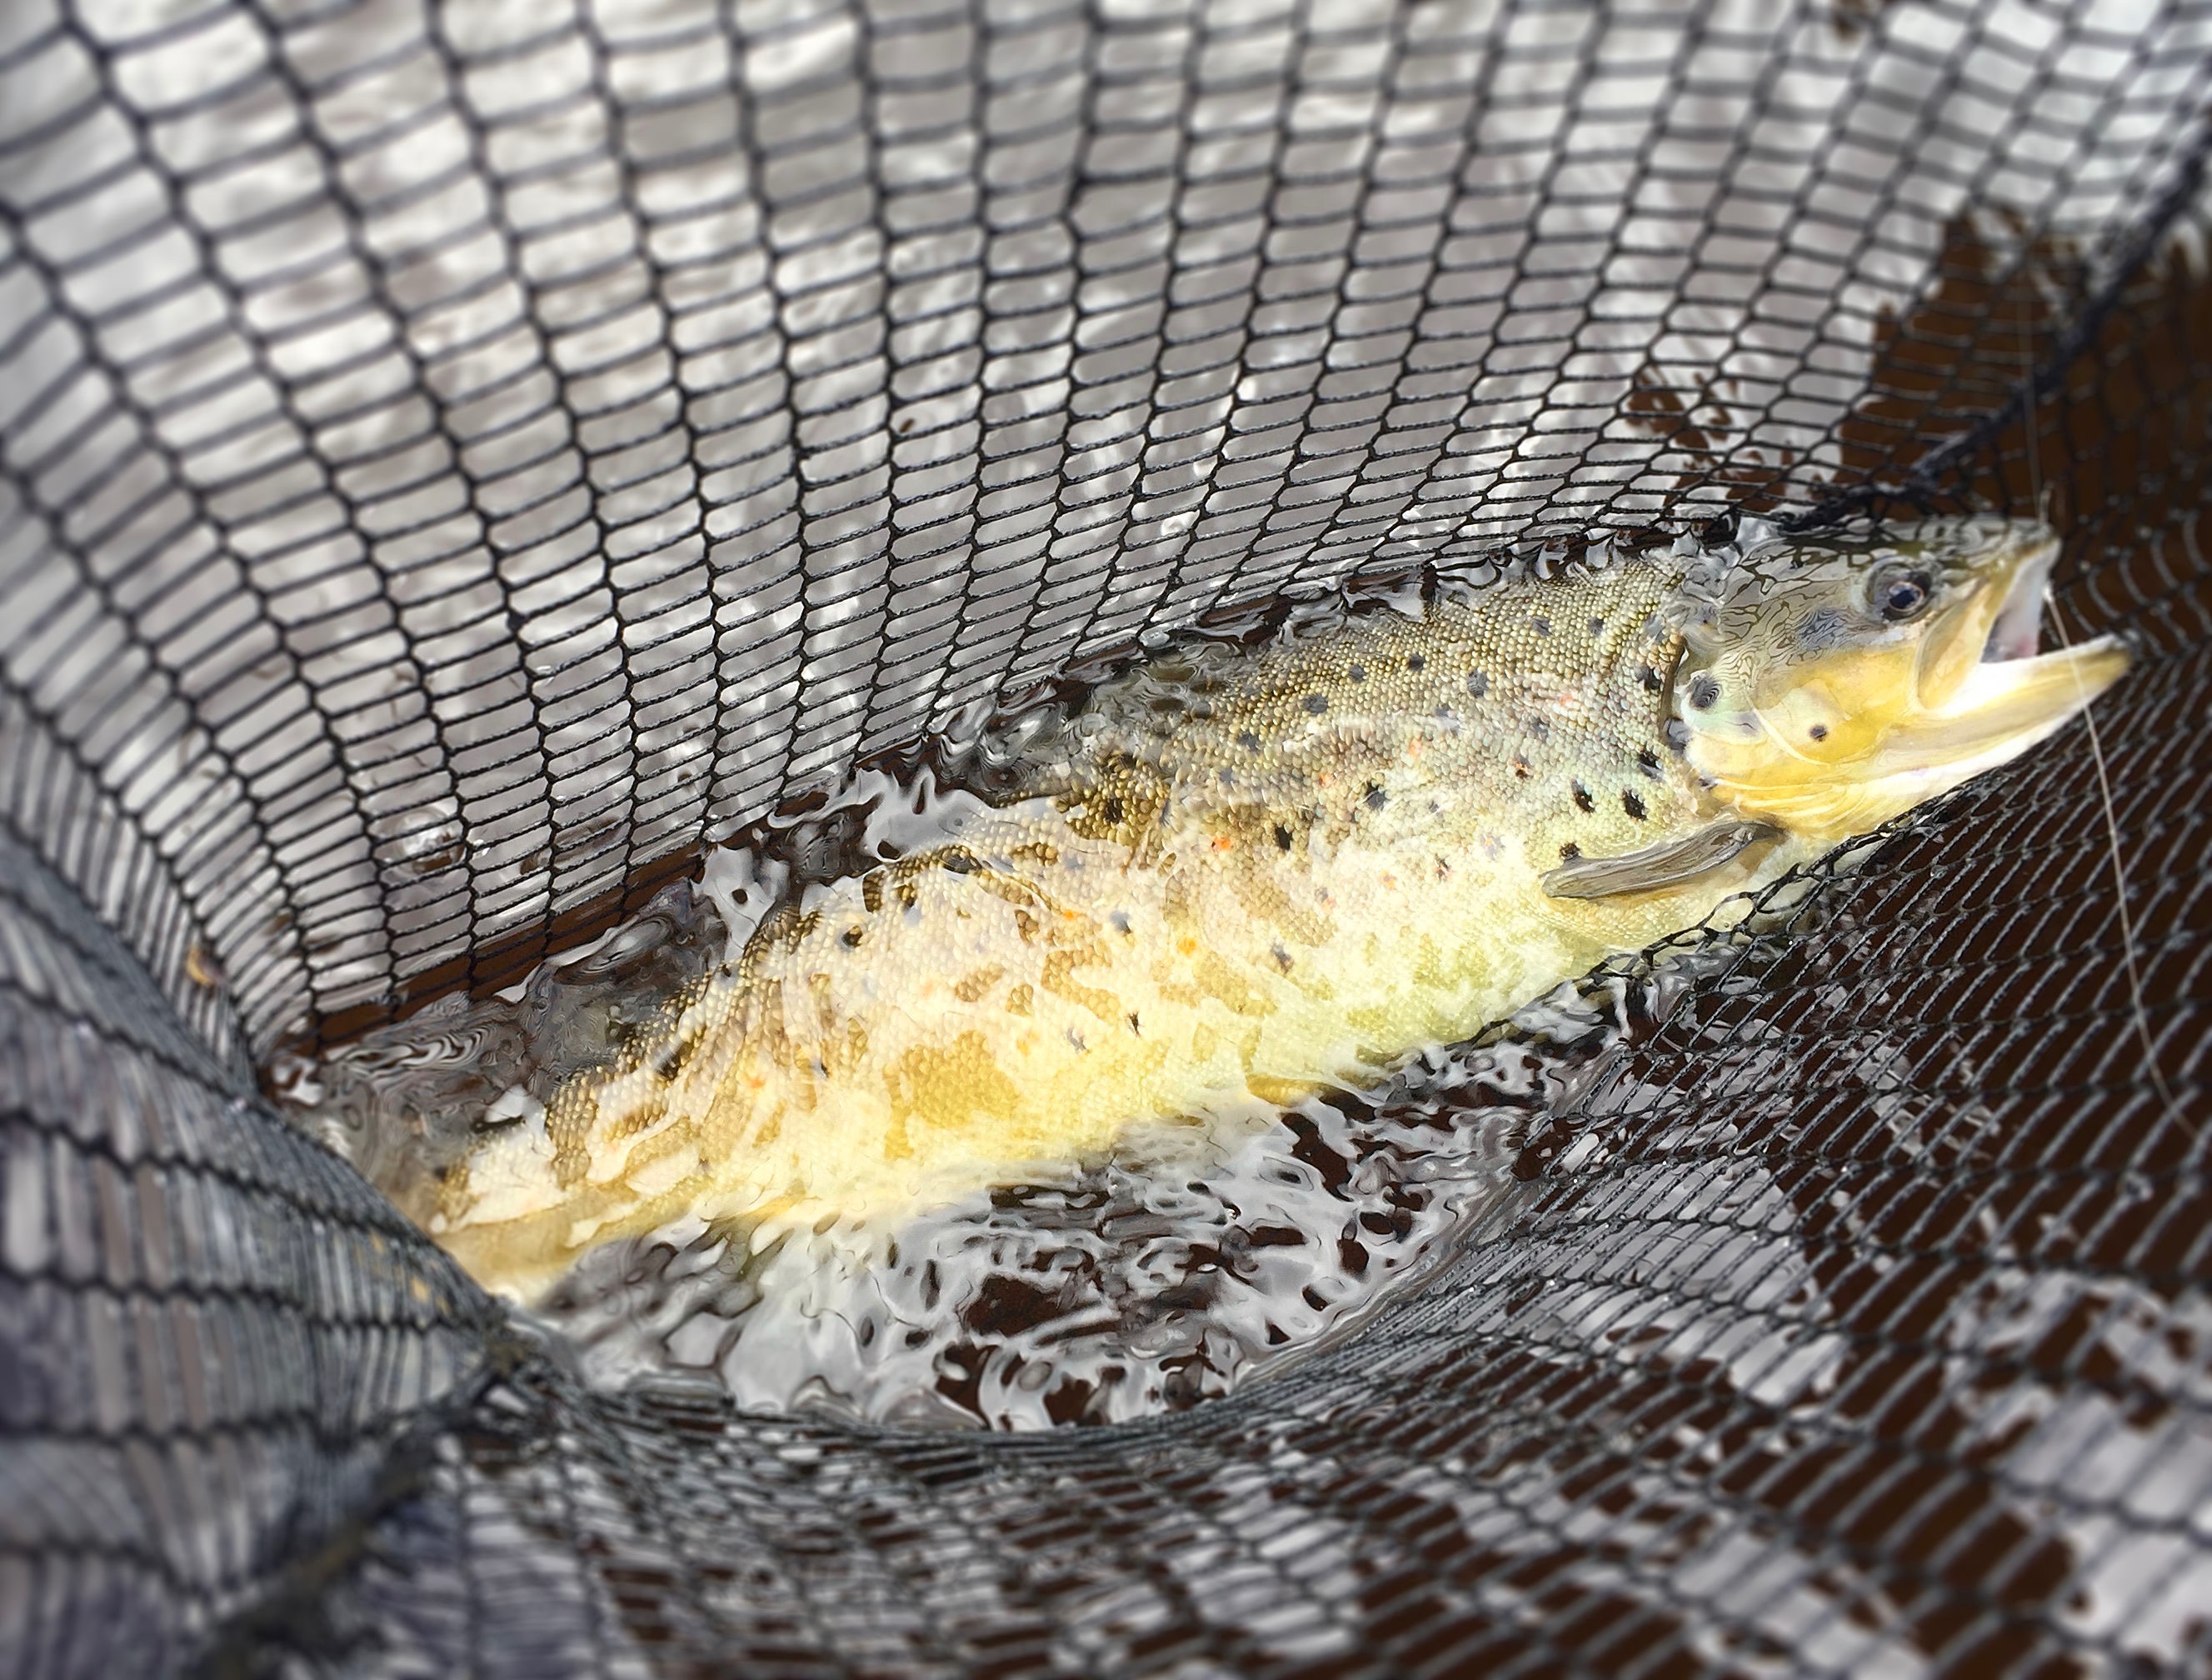 The Stars of the show - cracking Brown Trout 